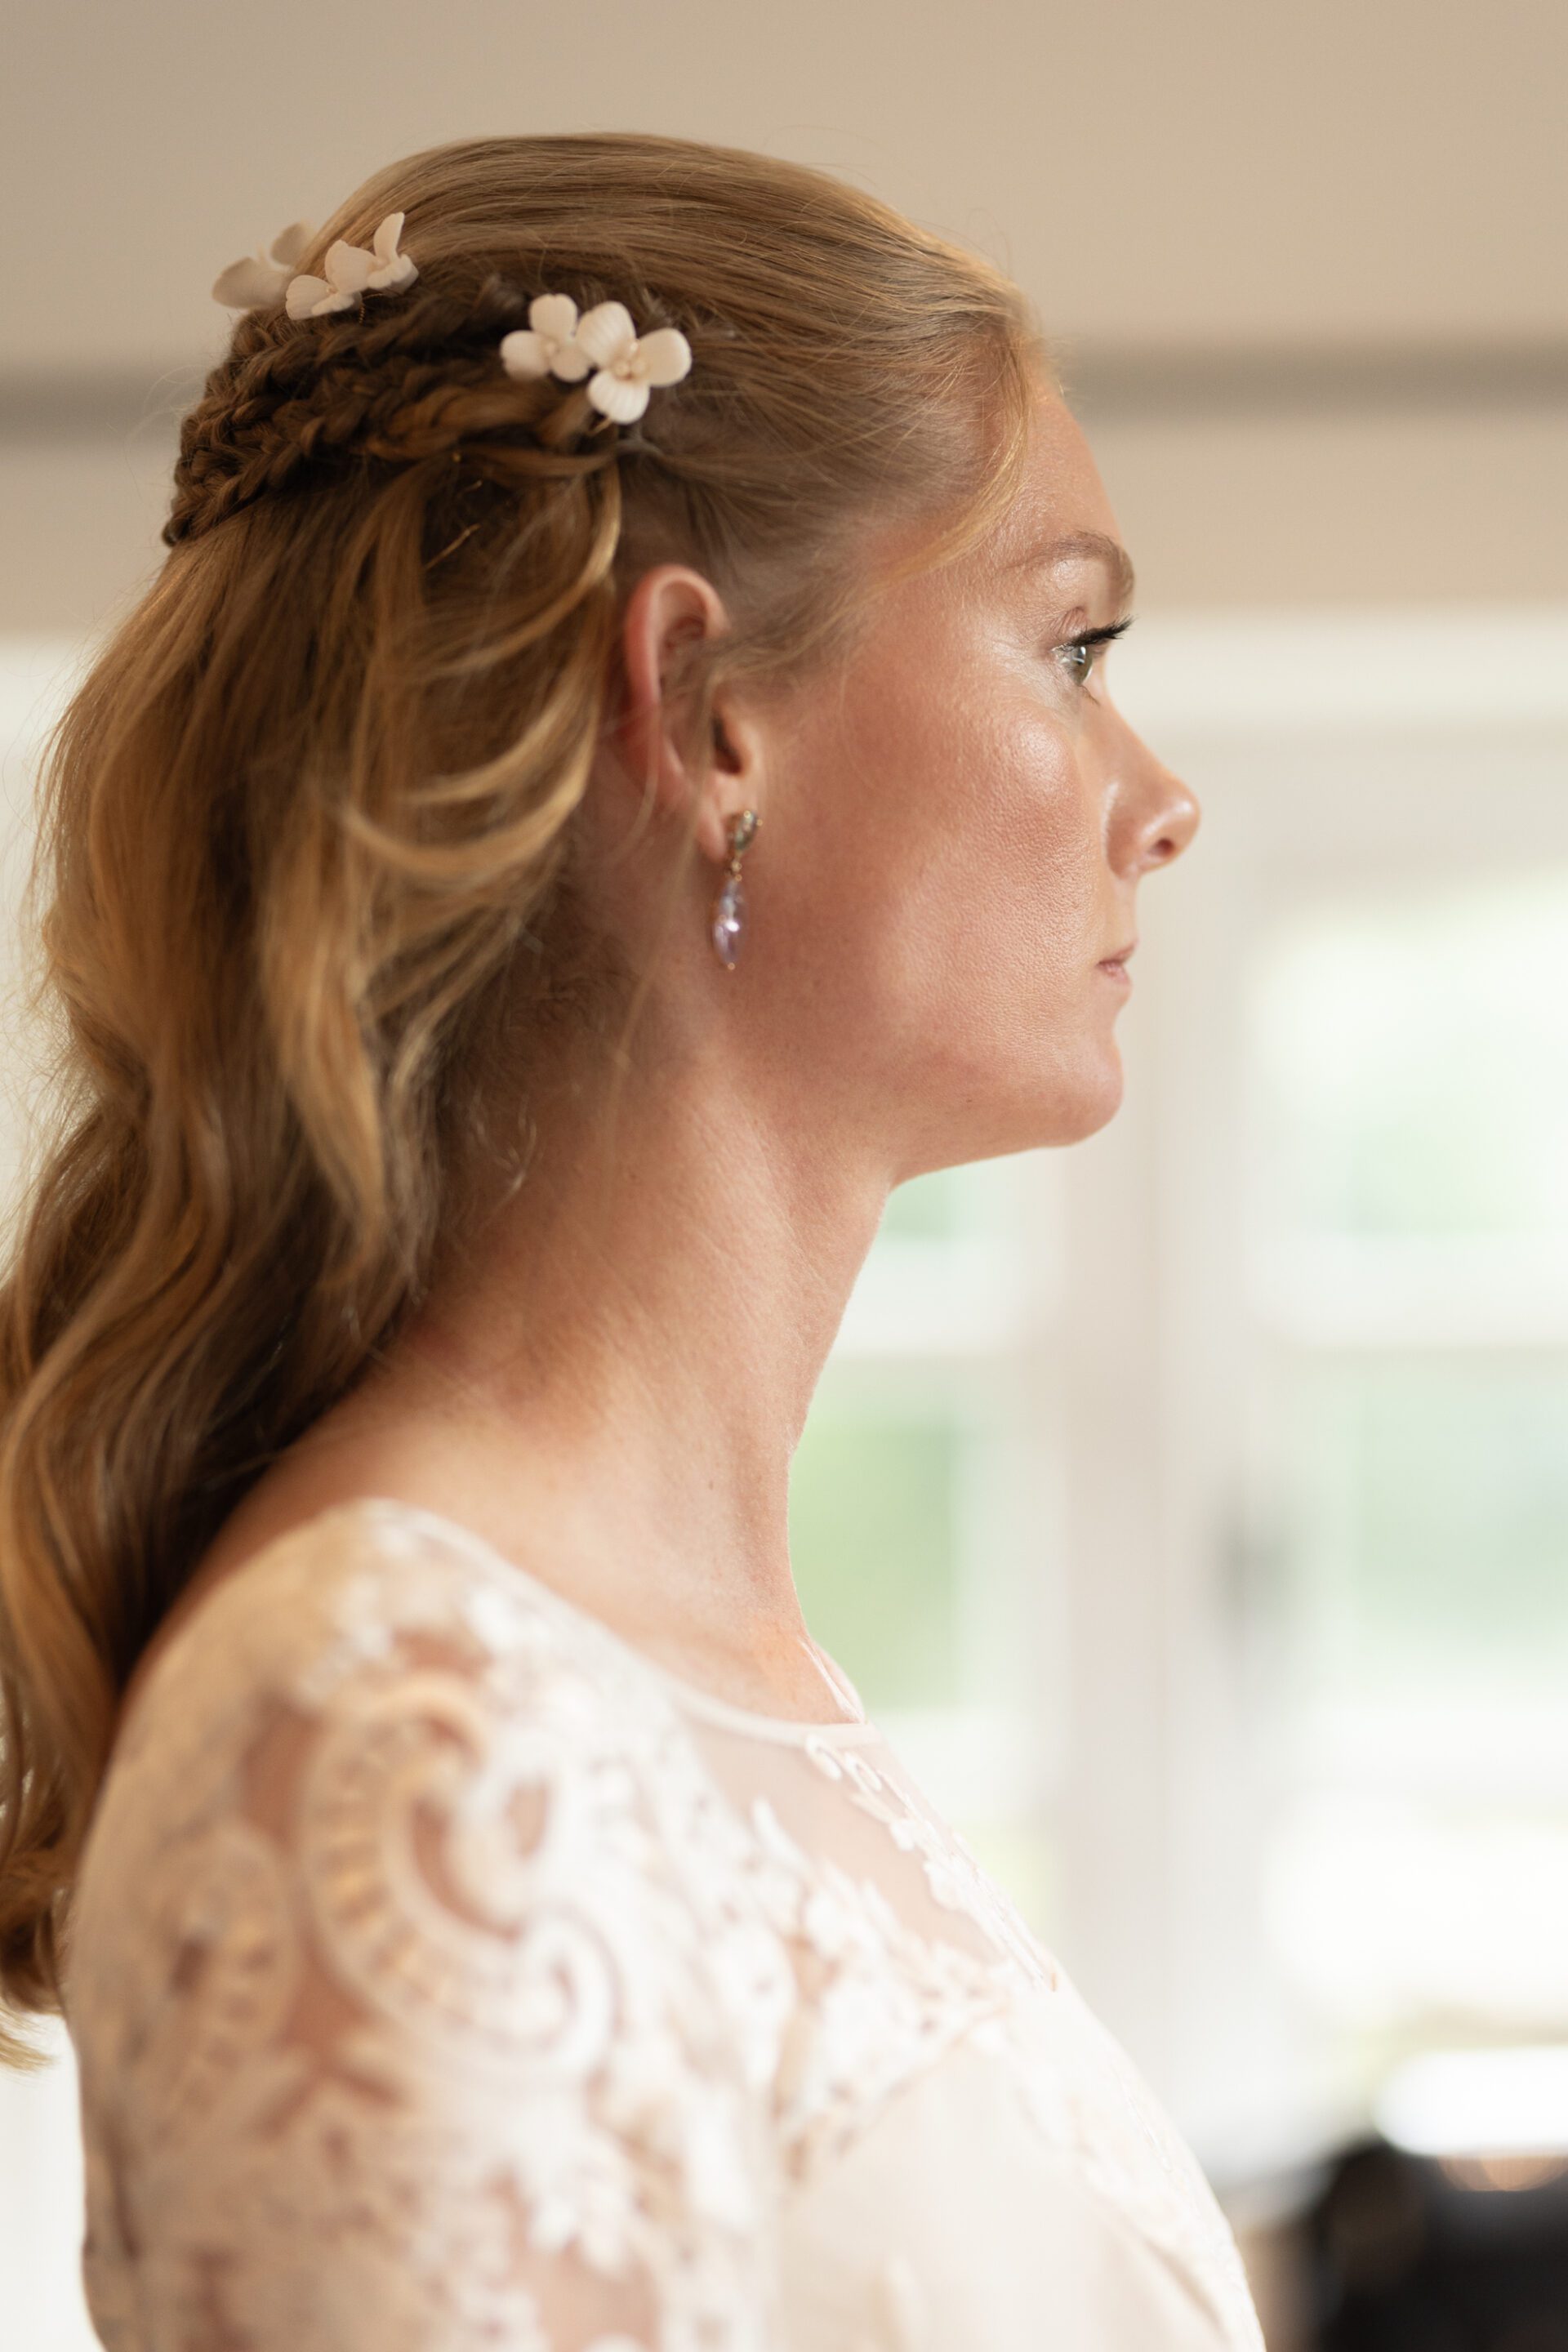 A close up bridal portrait before the wedding ceremony at Brickwall House